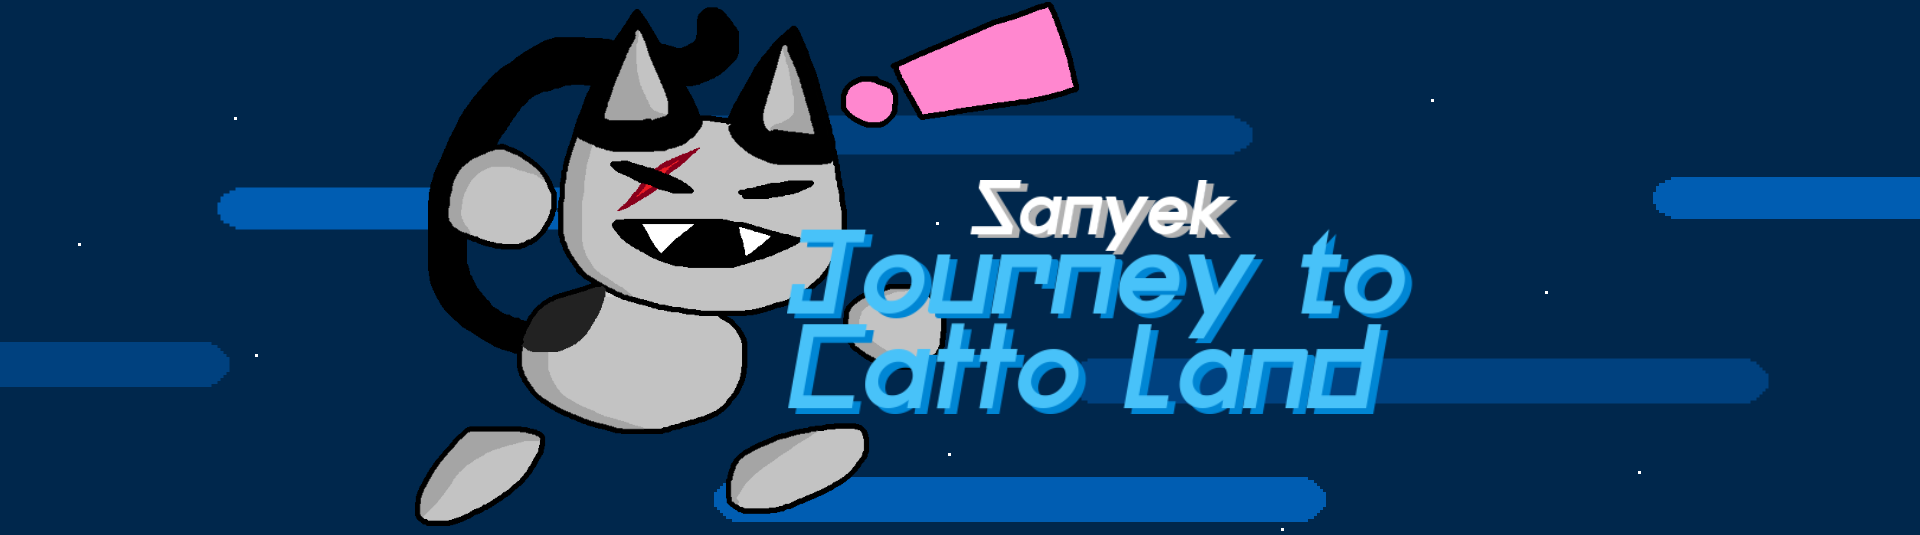 Sanyek: Journey to Catto Land! Mod for Catto Boi: Journey to Catto Land!